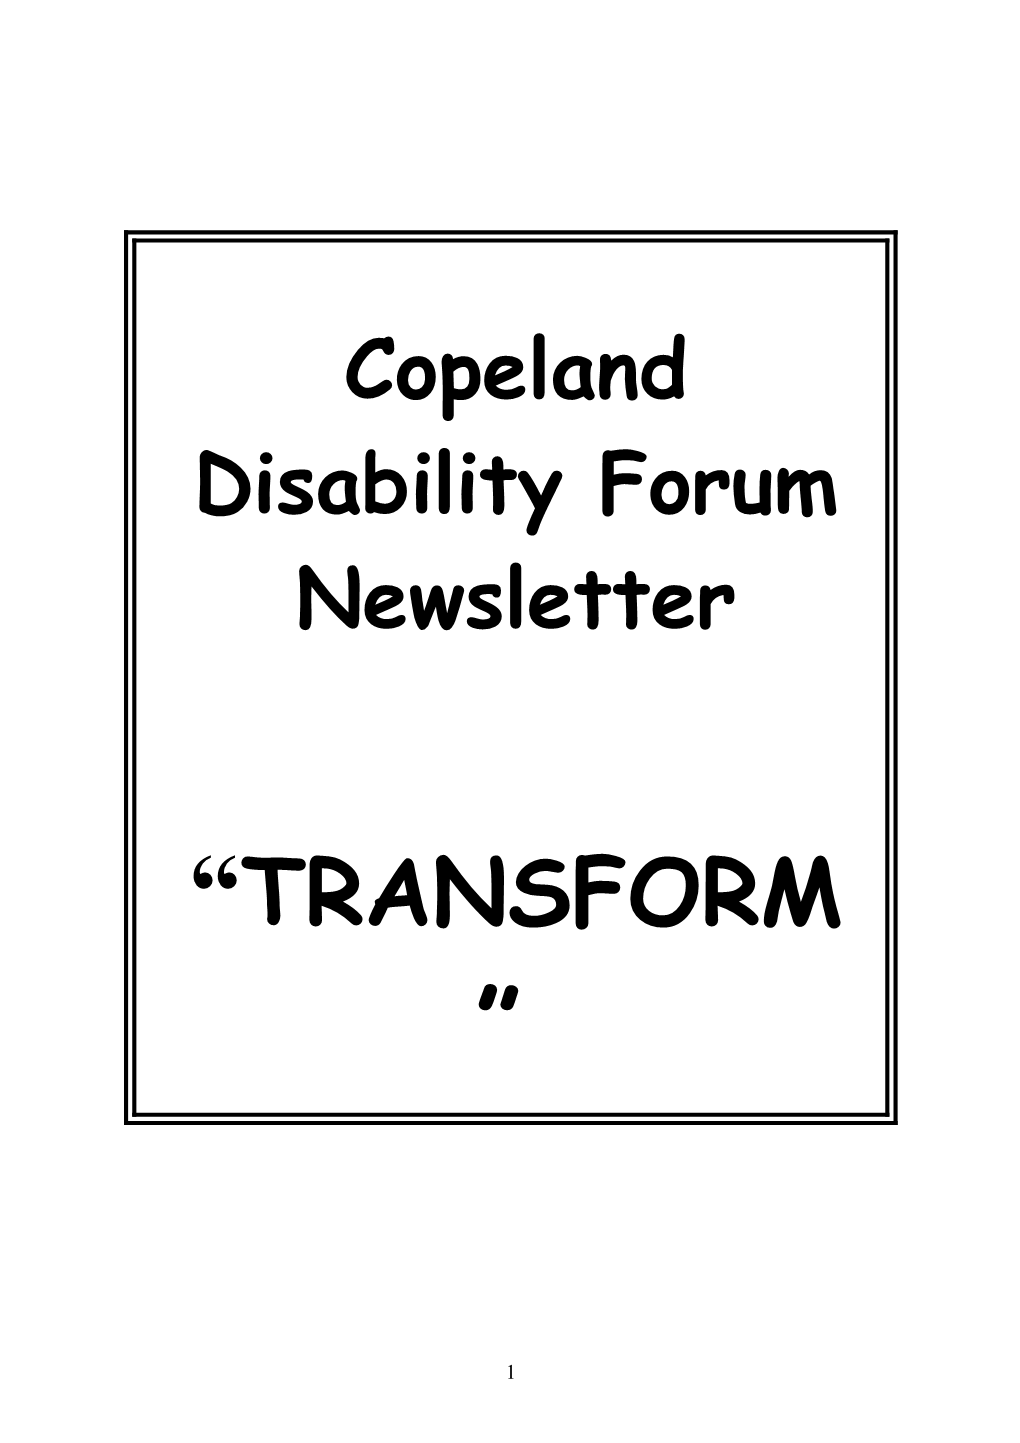 Welcome to the New Copeland Disability Forum Newsletter